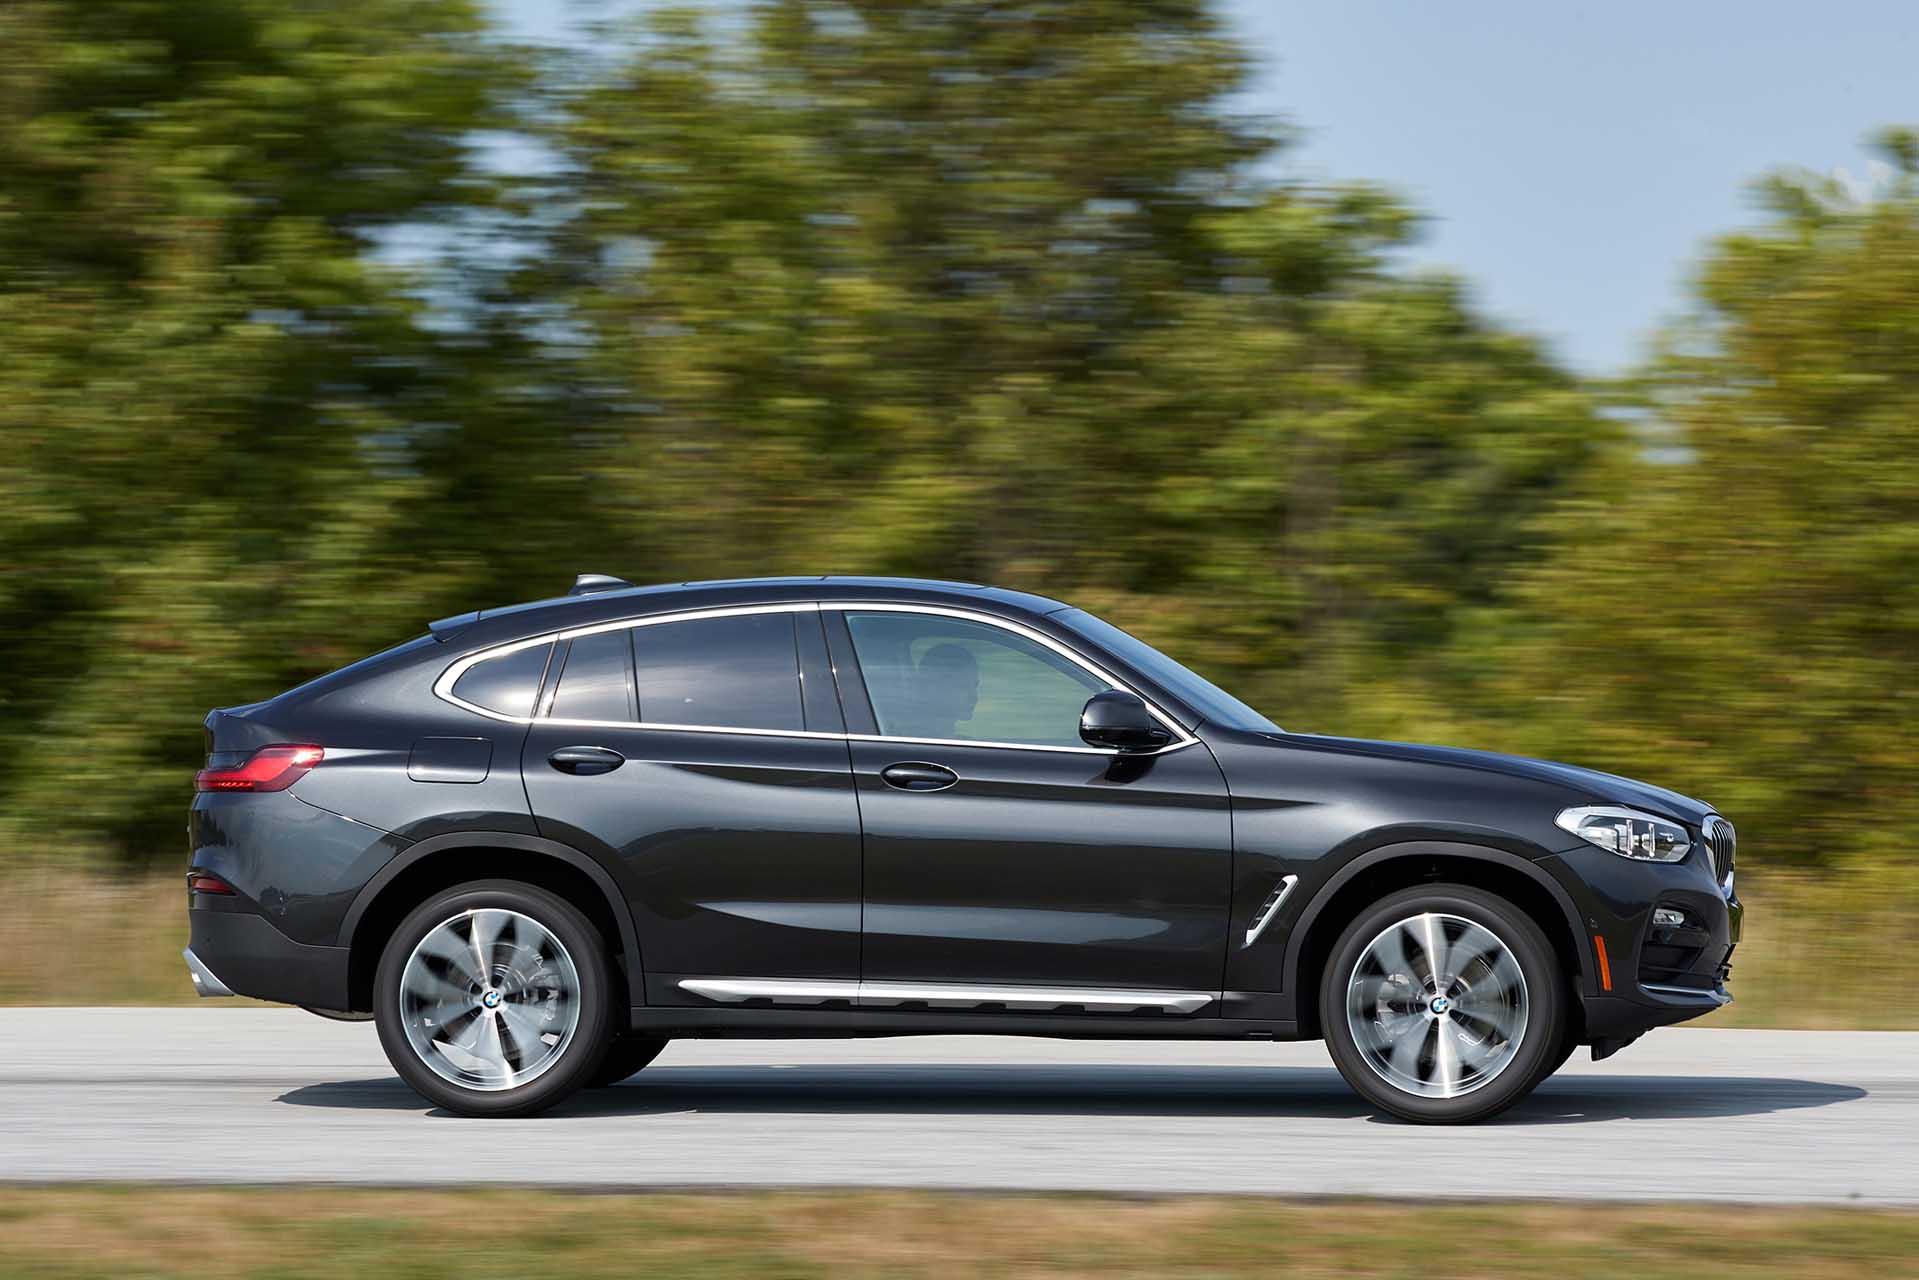 BMW X4 Review, Ratings, Specs, Prices, and Photo Car Connection